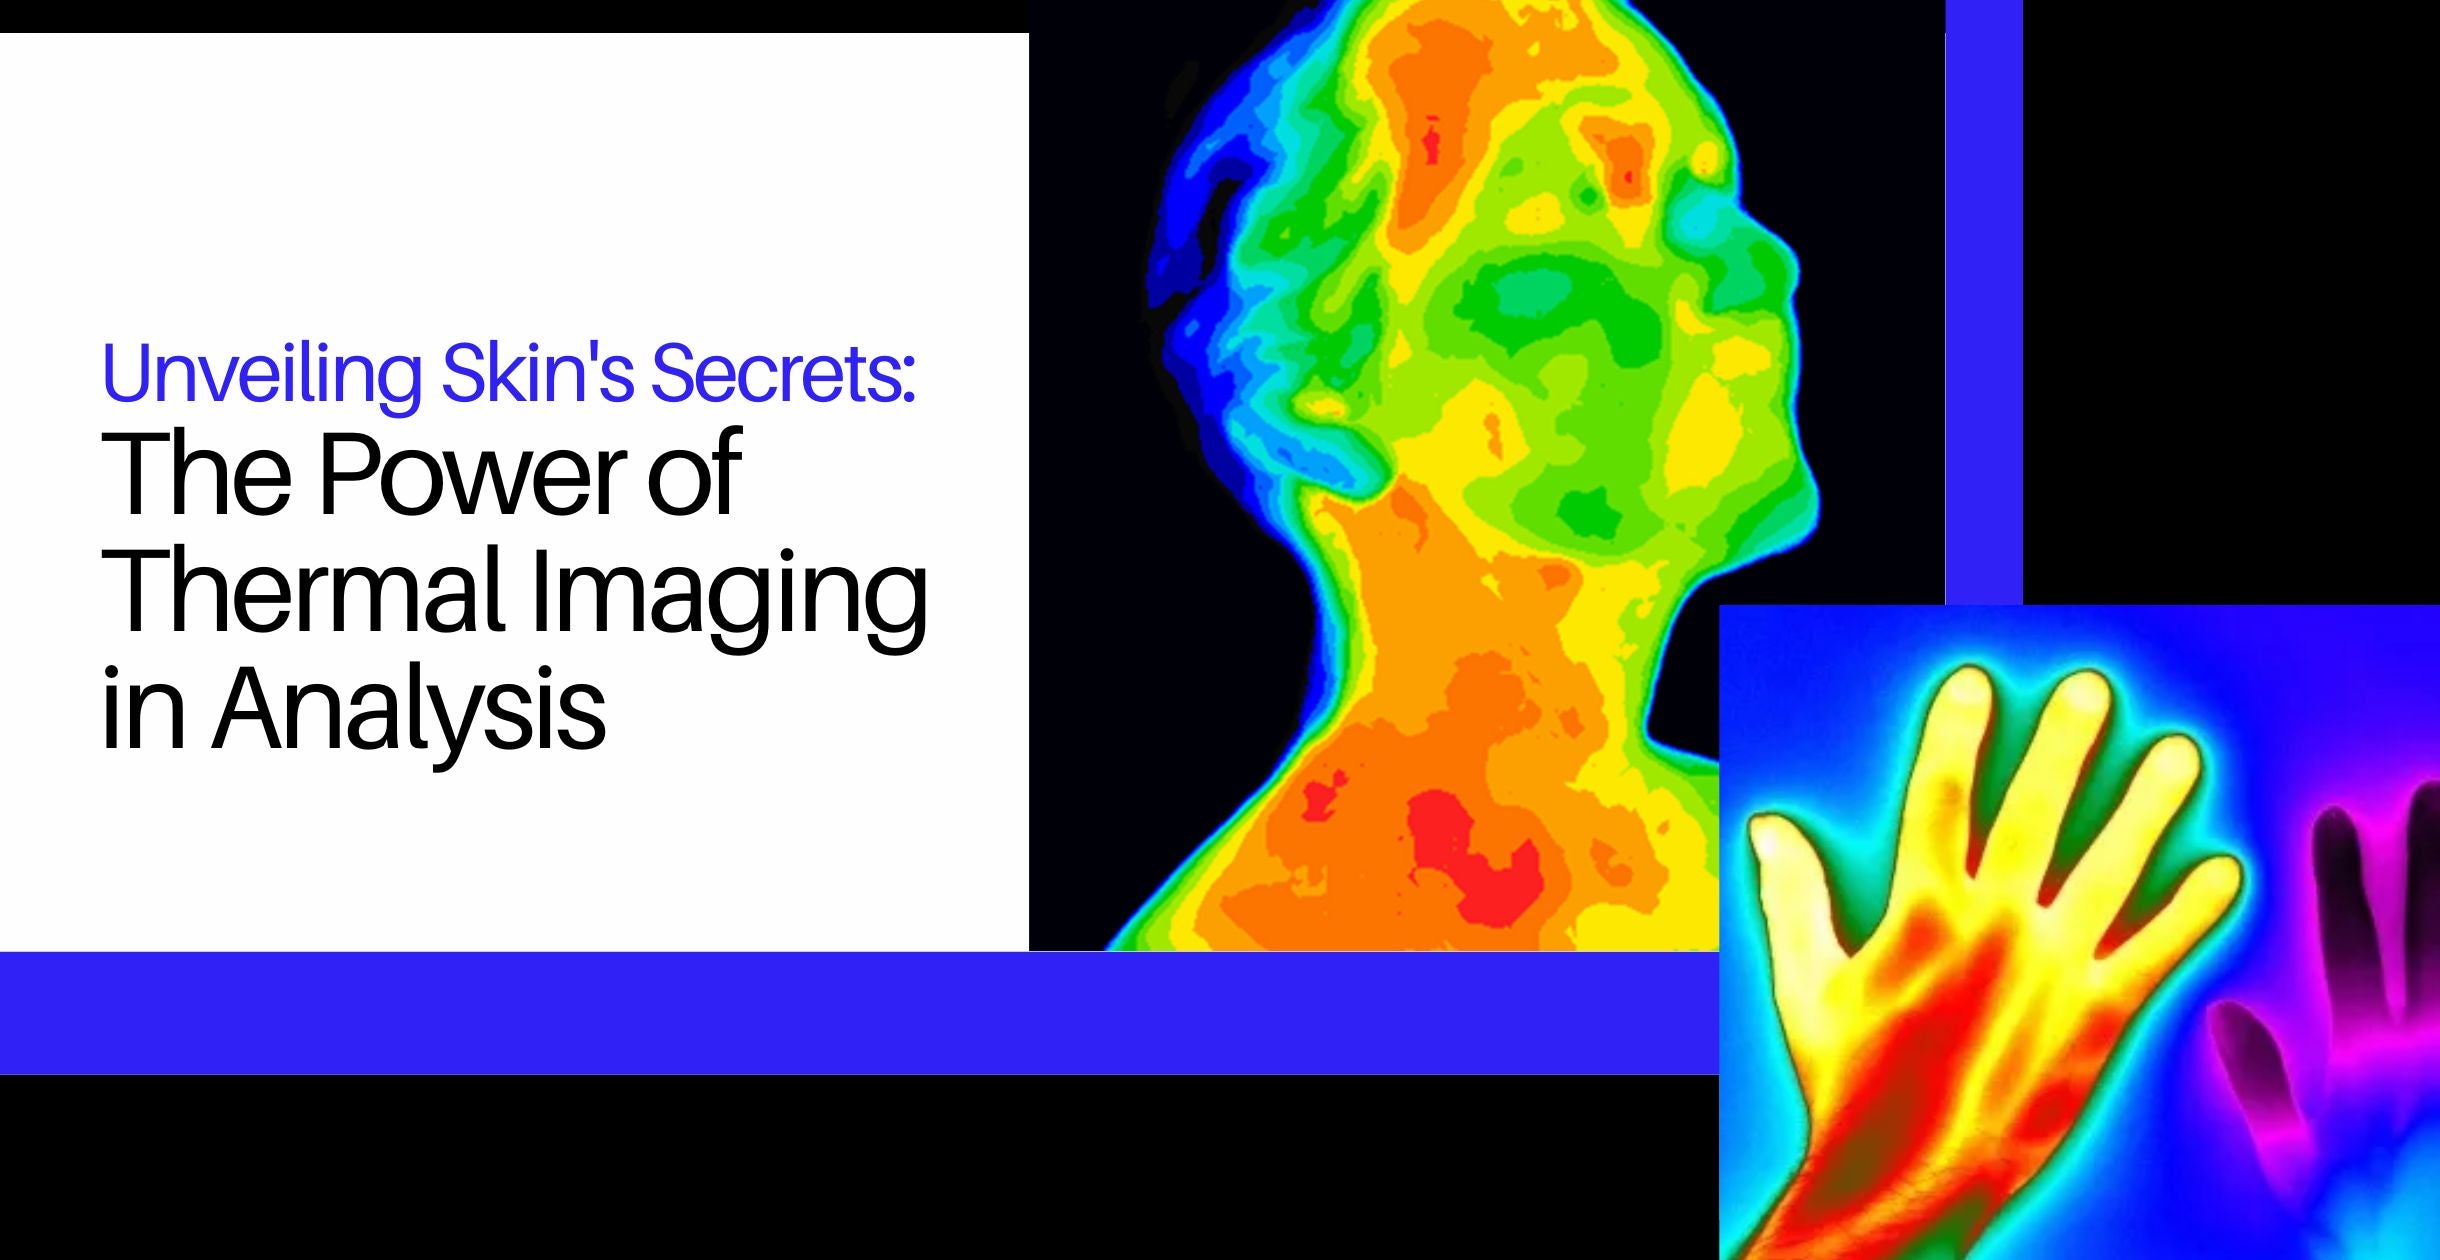 Unveiling Skin's Secrets: The Power of Thermal Imaging in Analysis